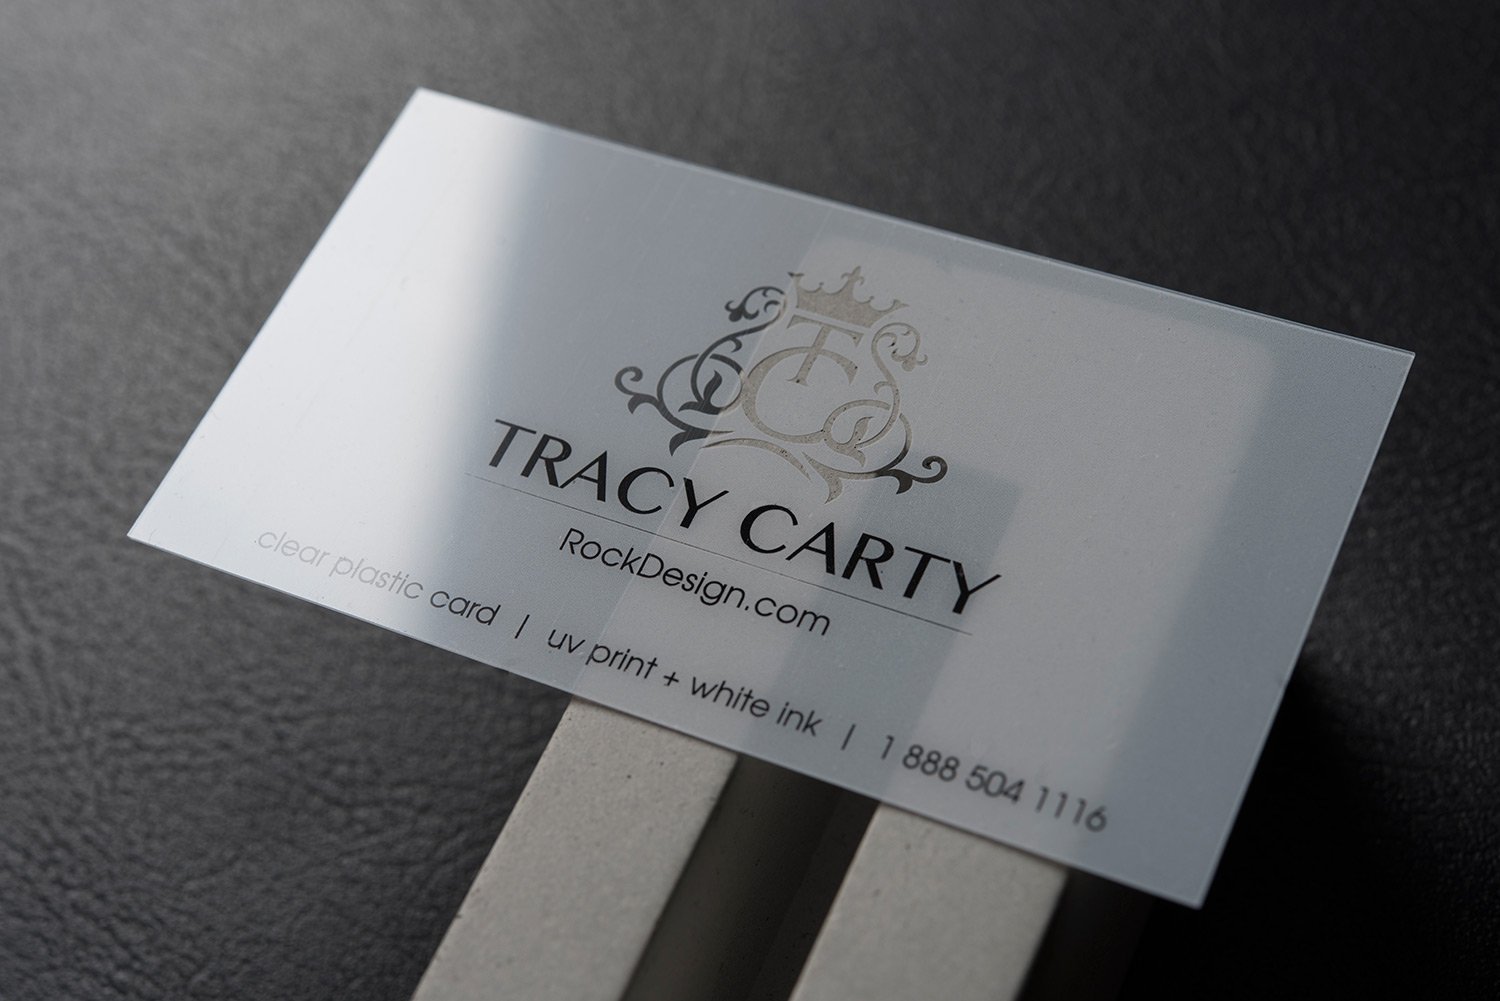 Elegant transparent plastic name card design – Tracy Carty With Regard To Transparent Business Cards Template